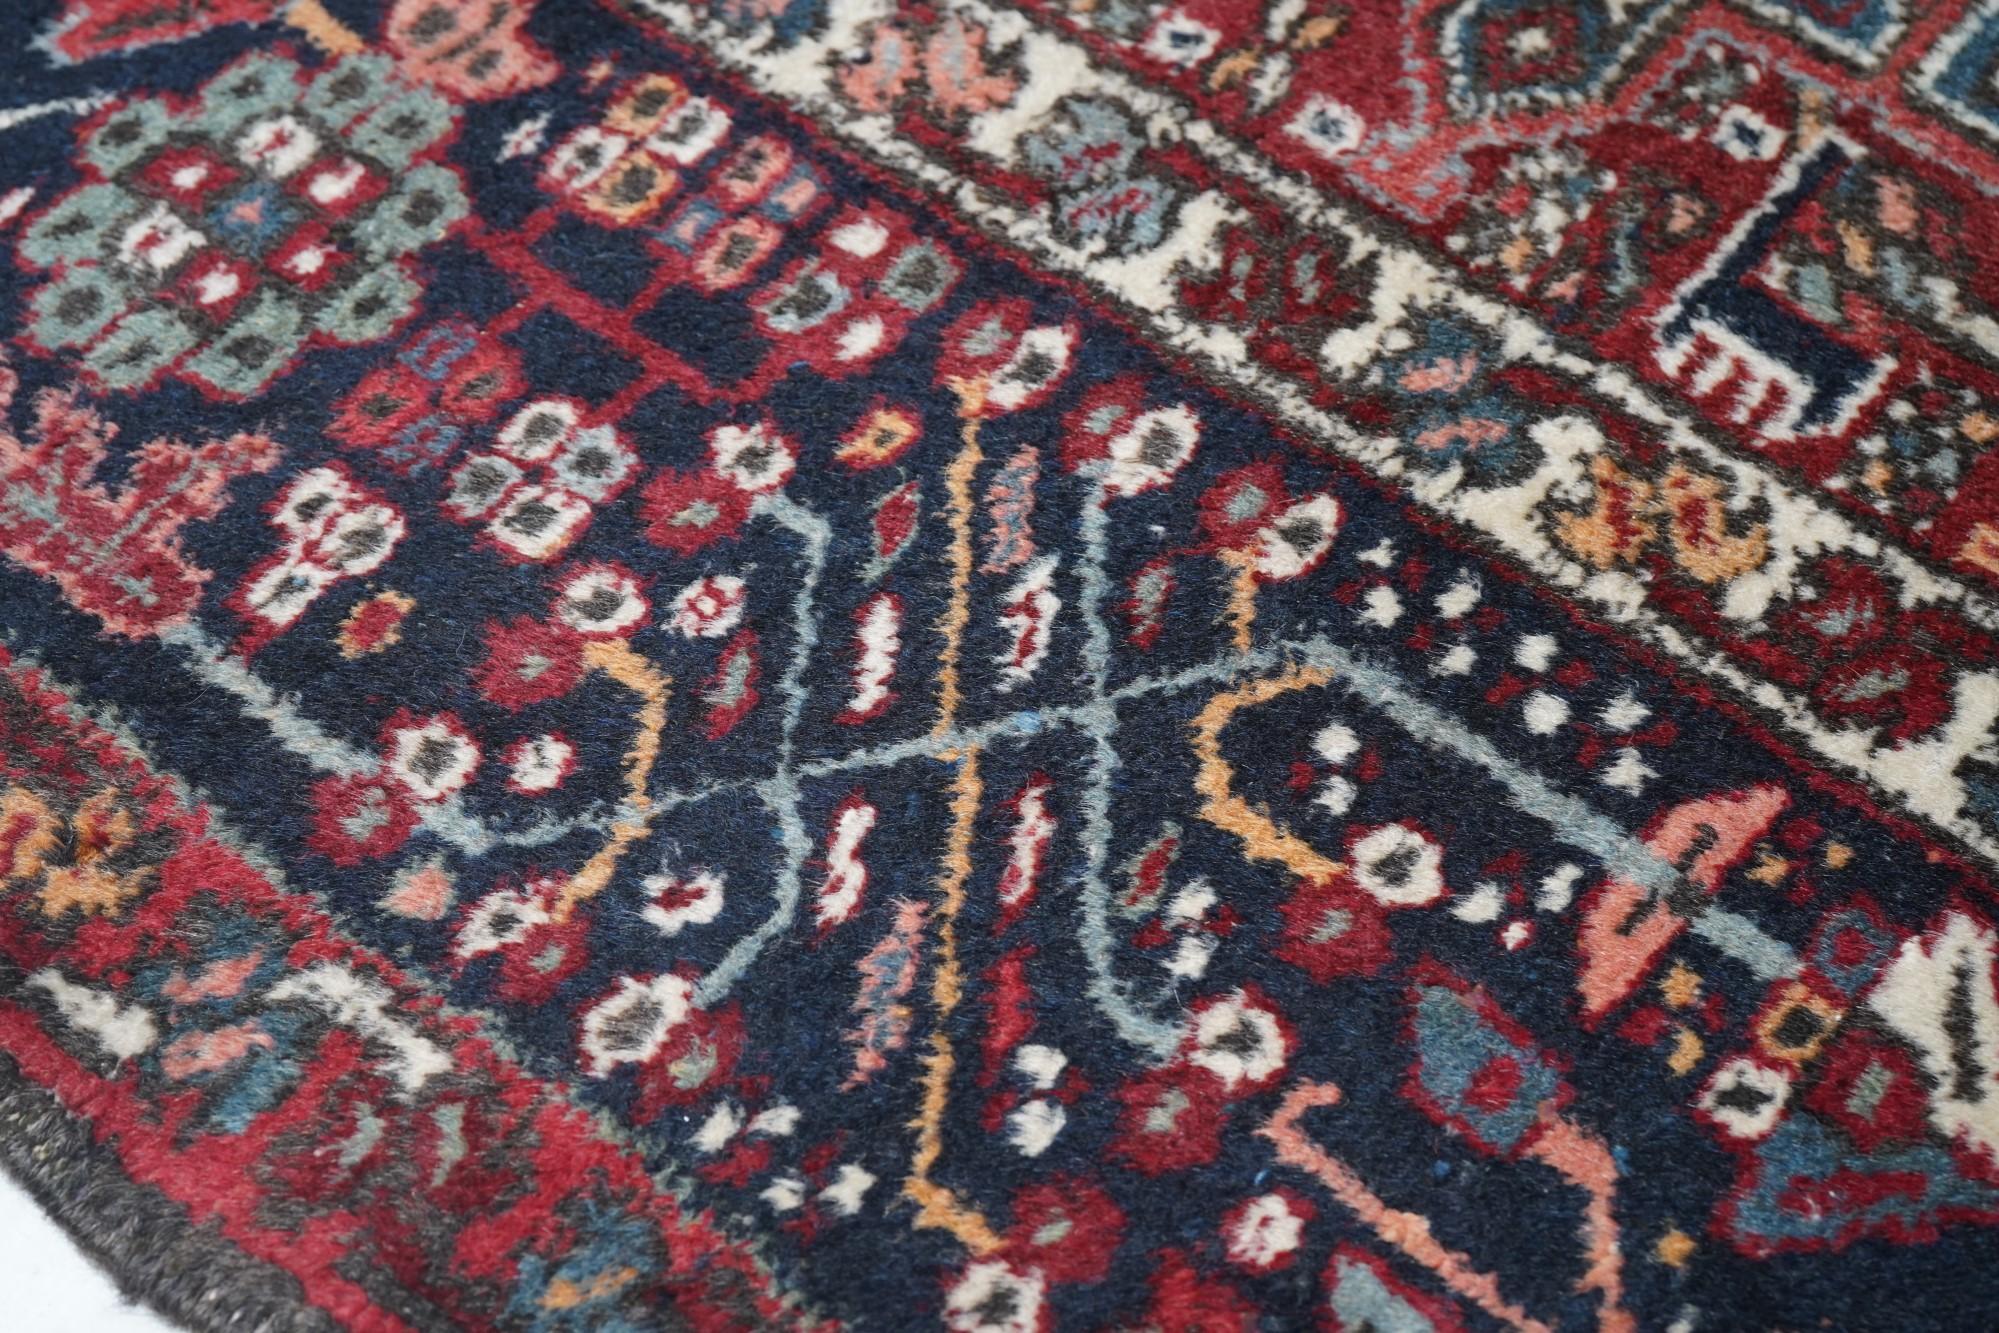 Vintage Heriz Rug 7'5'' x 11'2'' In Good Condition For Sale In New York, NY